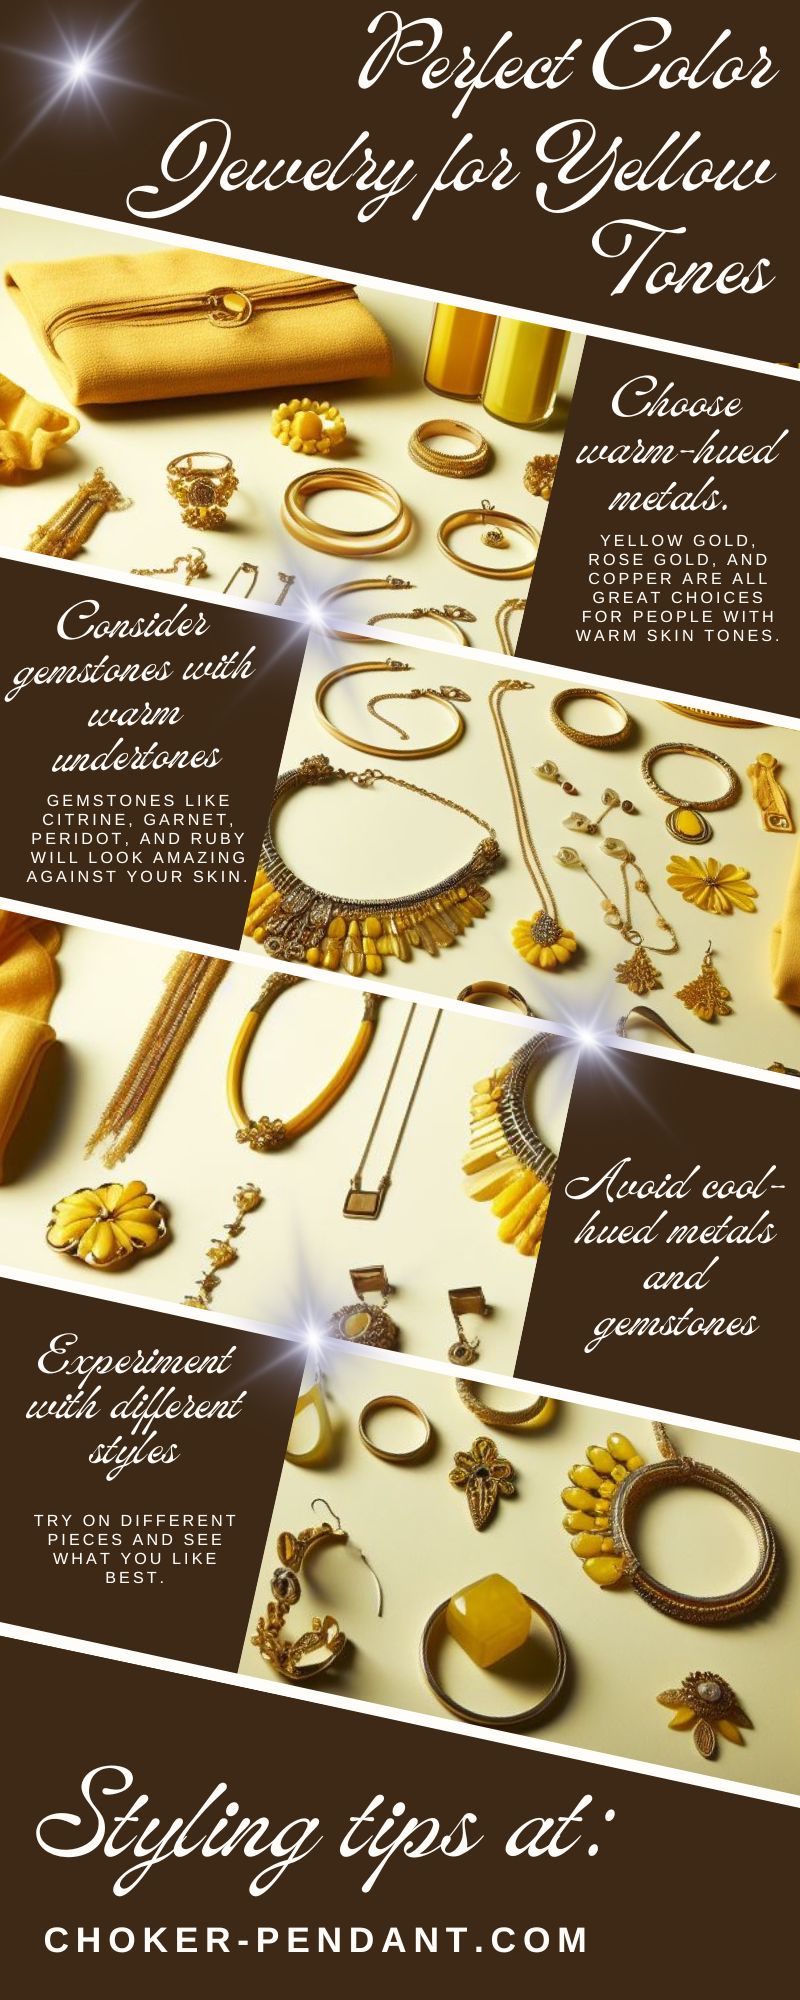 Perfect Color Jewelry for Yellow Tones - infographic